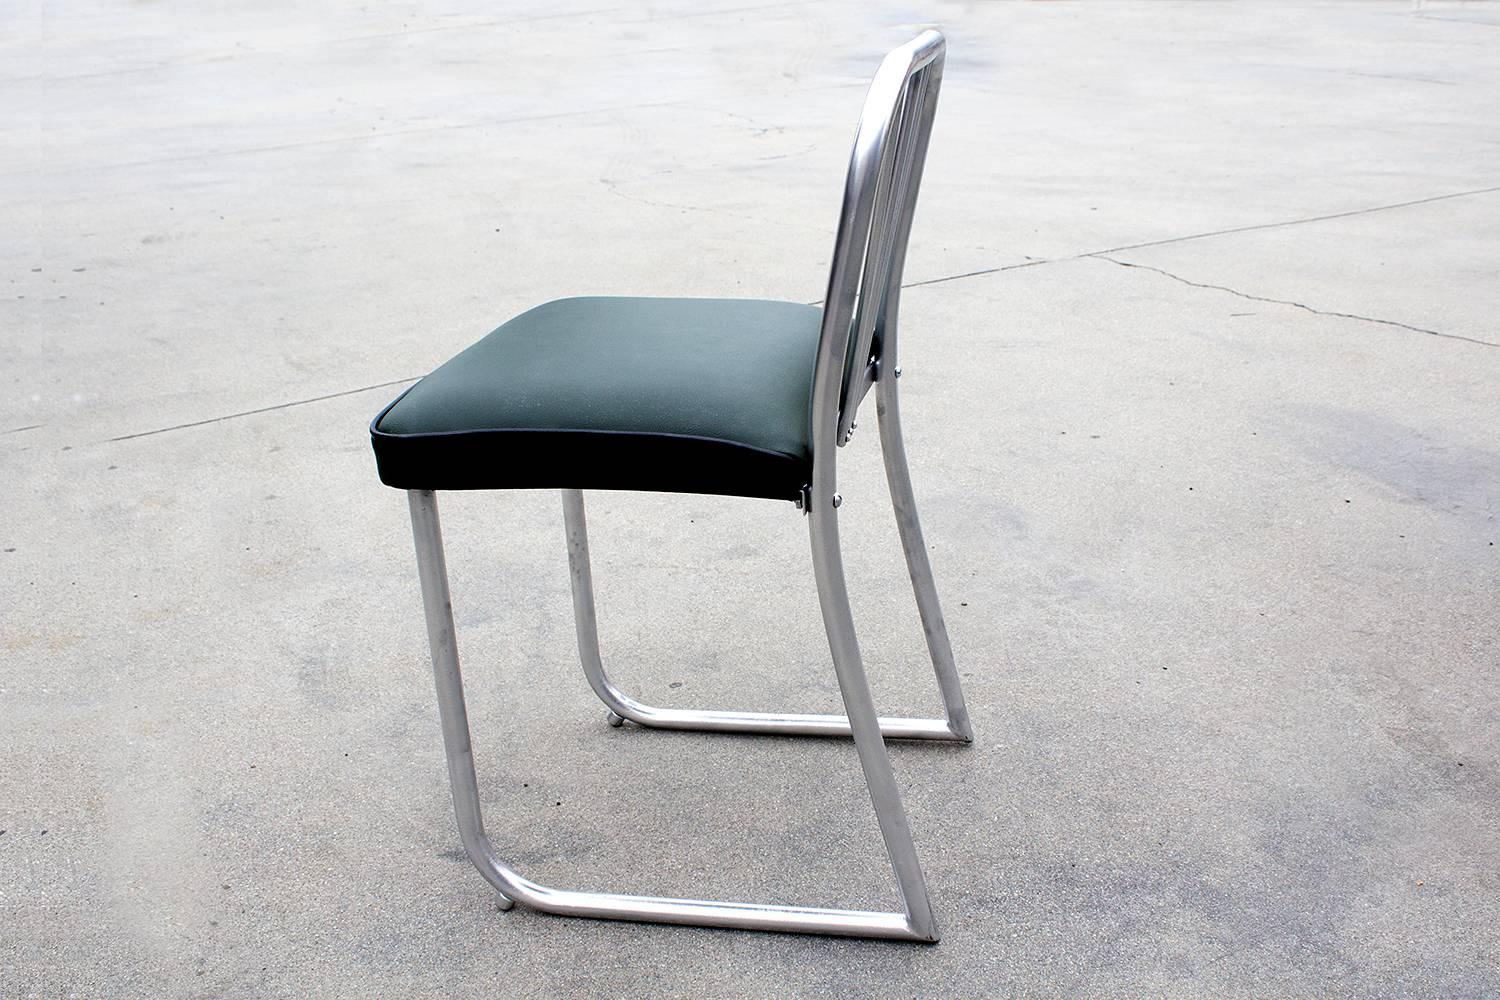 Uncommon Art Deco-era nurses chair, circa 1930s. Sculptural steel frame with unique V-shape back. Newly reupholstered seat in high-quality green vinyl with black piping. Repainted steel.

Dimensions: 15.5